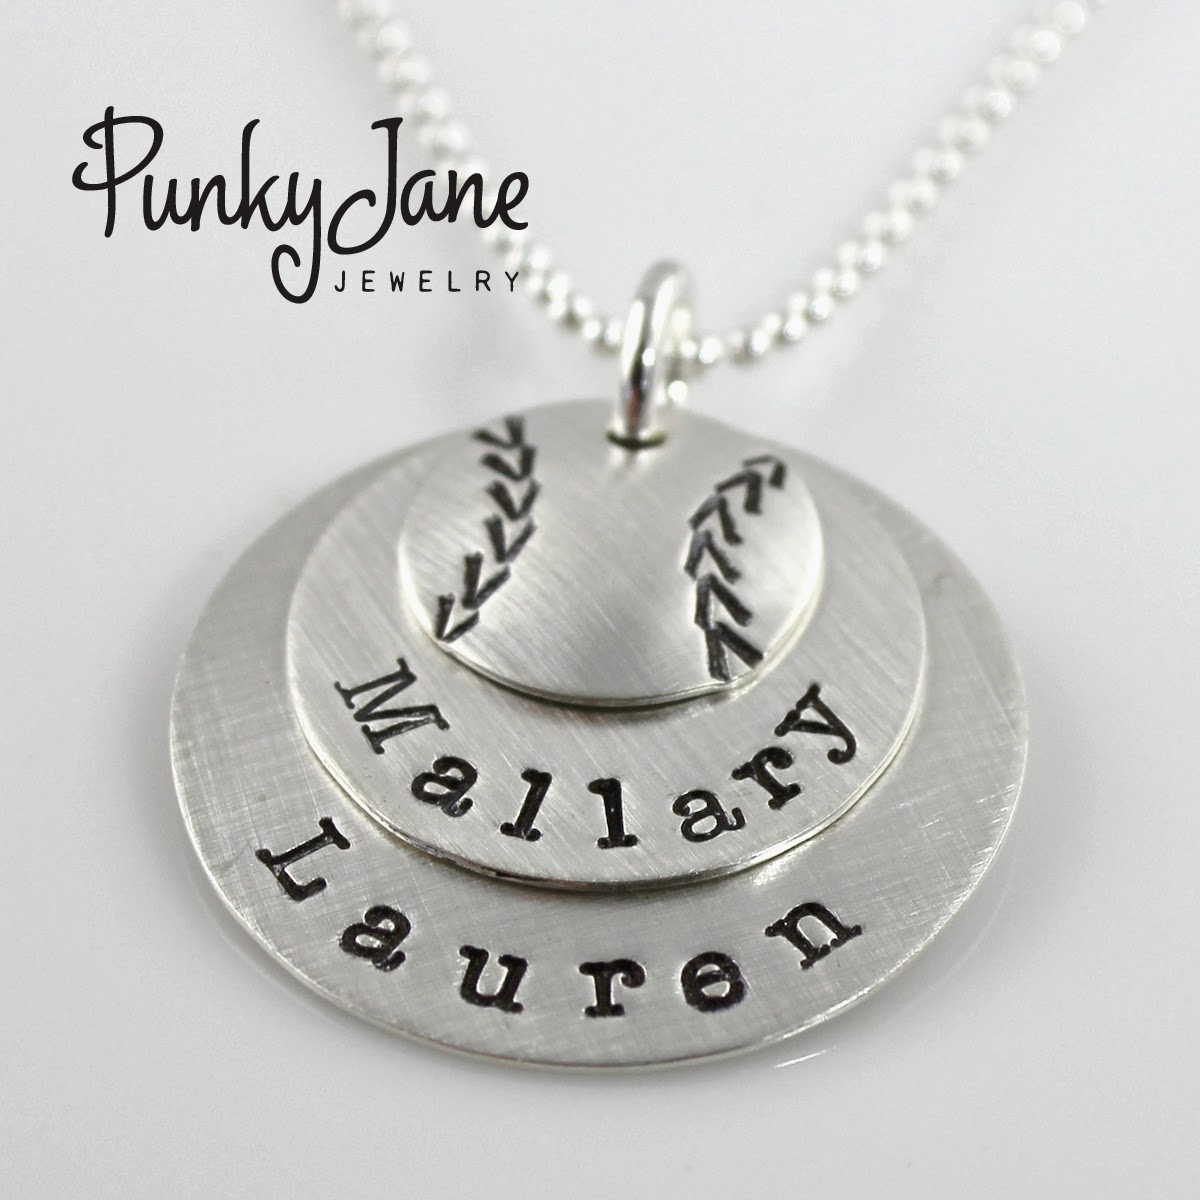 http://shop.punkyjane.com/Baseball-Sweet-Stack-hand-stamped-and-personalized-necklace-2356.htm